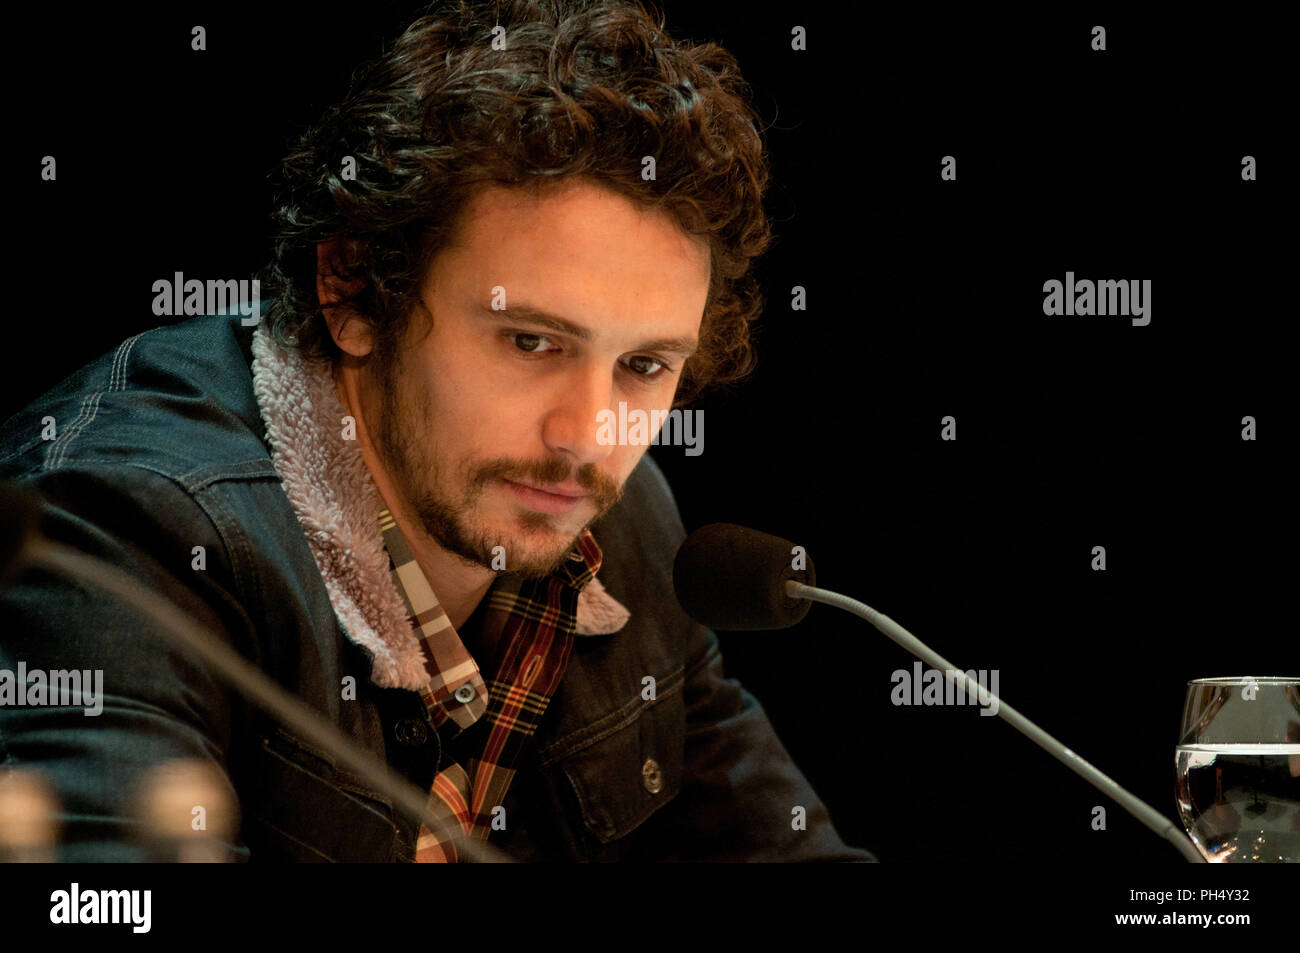 Actor and director James Franco seen at the Filmfest München 2012 Stock Photo